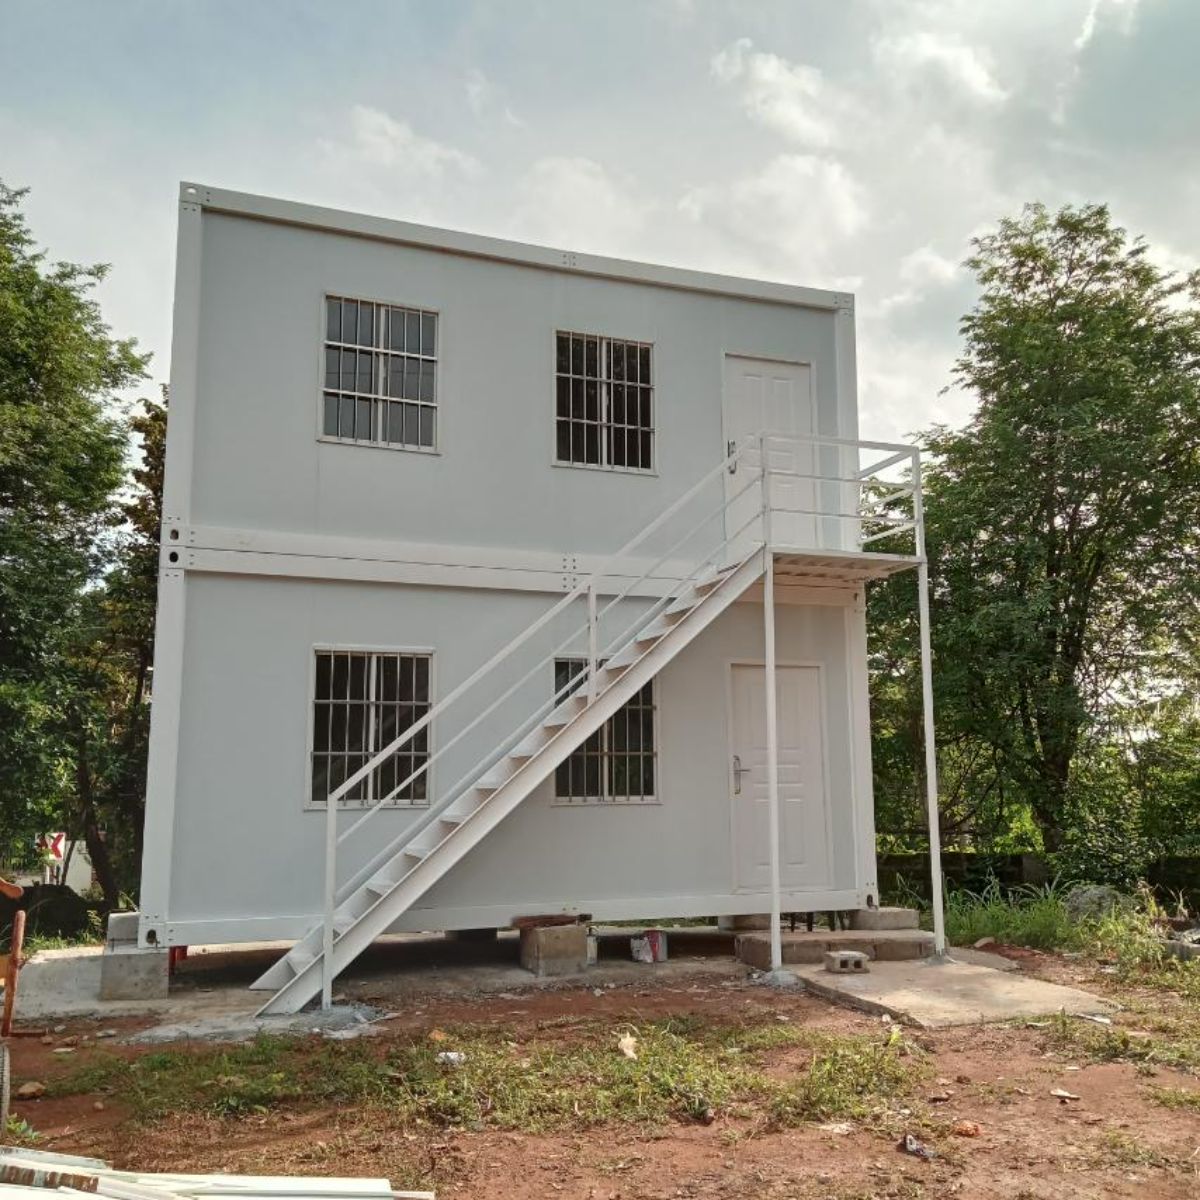 How Can a Prefab Container House be Used as a Dormitory